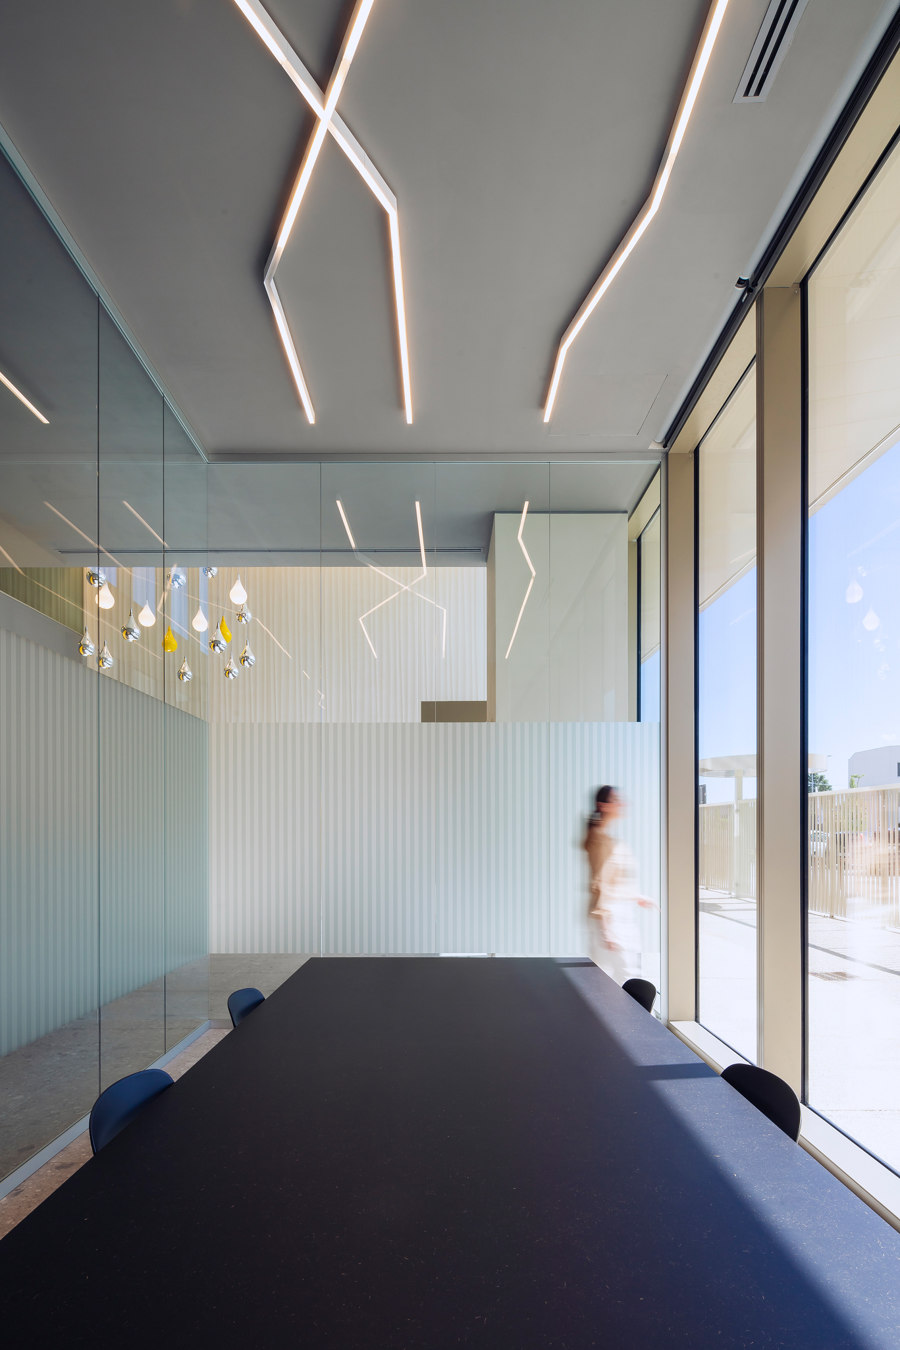 New Vimar Logistic Pole by Atelier(s) Alfonso Femia | Office buildings